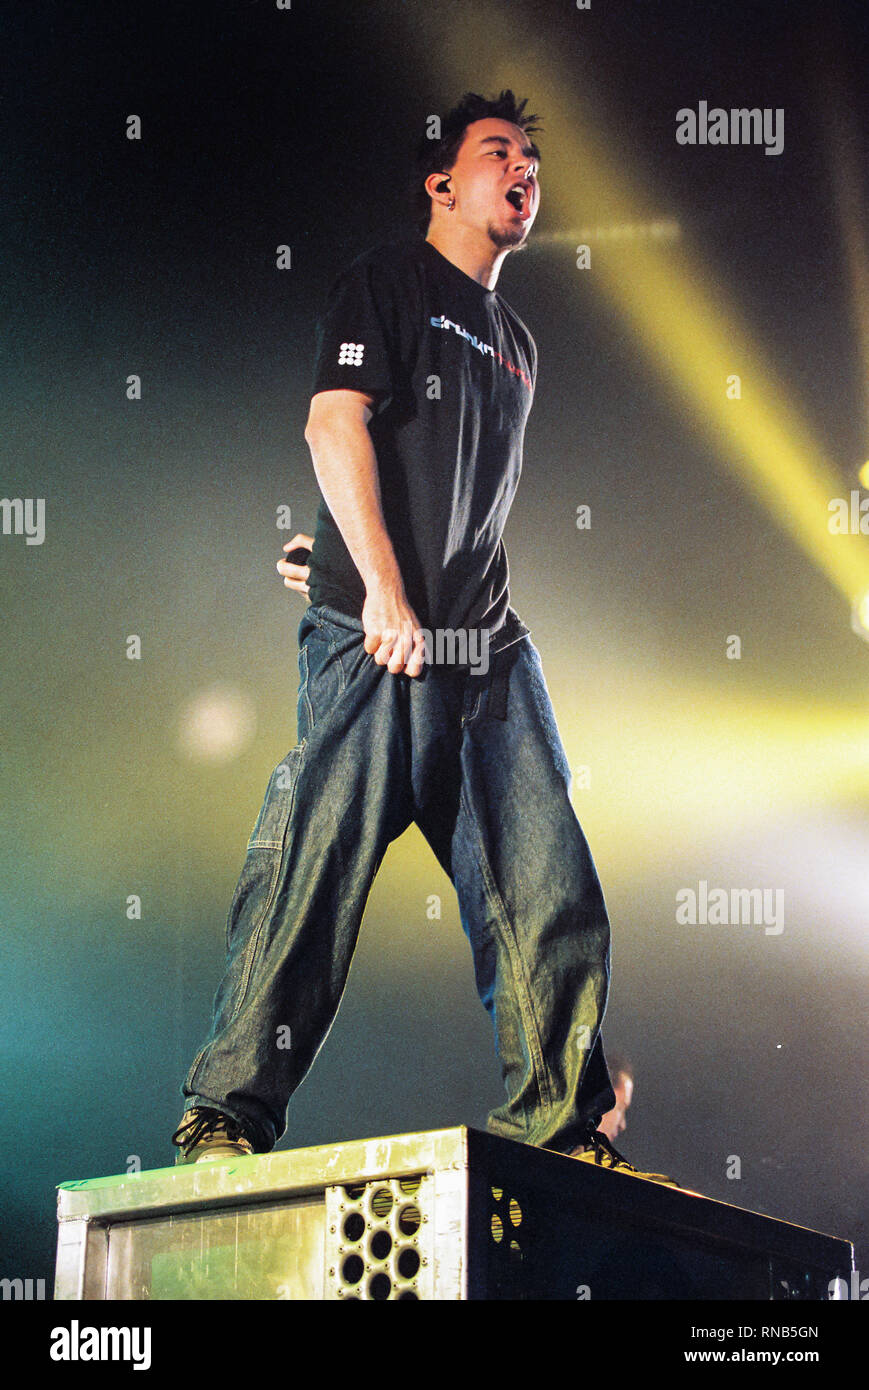 Mike Shinoda vocalist in Linkin Park performing at the London Docklands Arena 16th September 2001, London, England, United Kingdom. Stock Photo